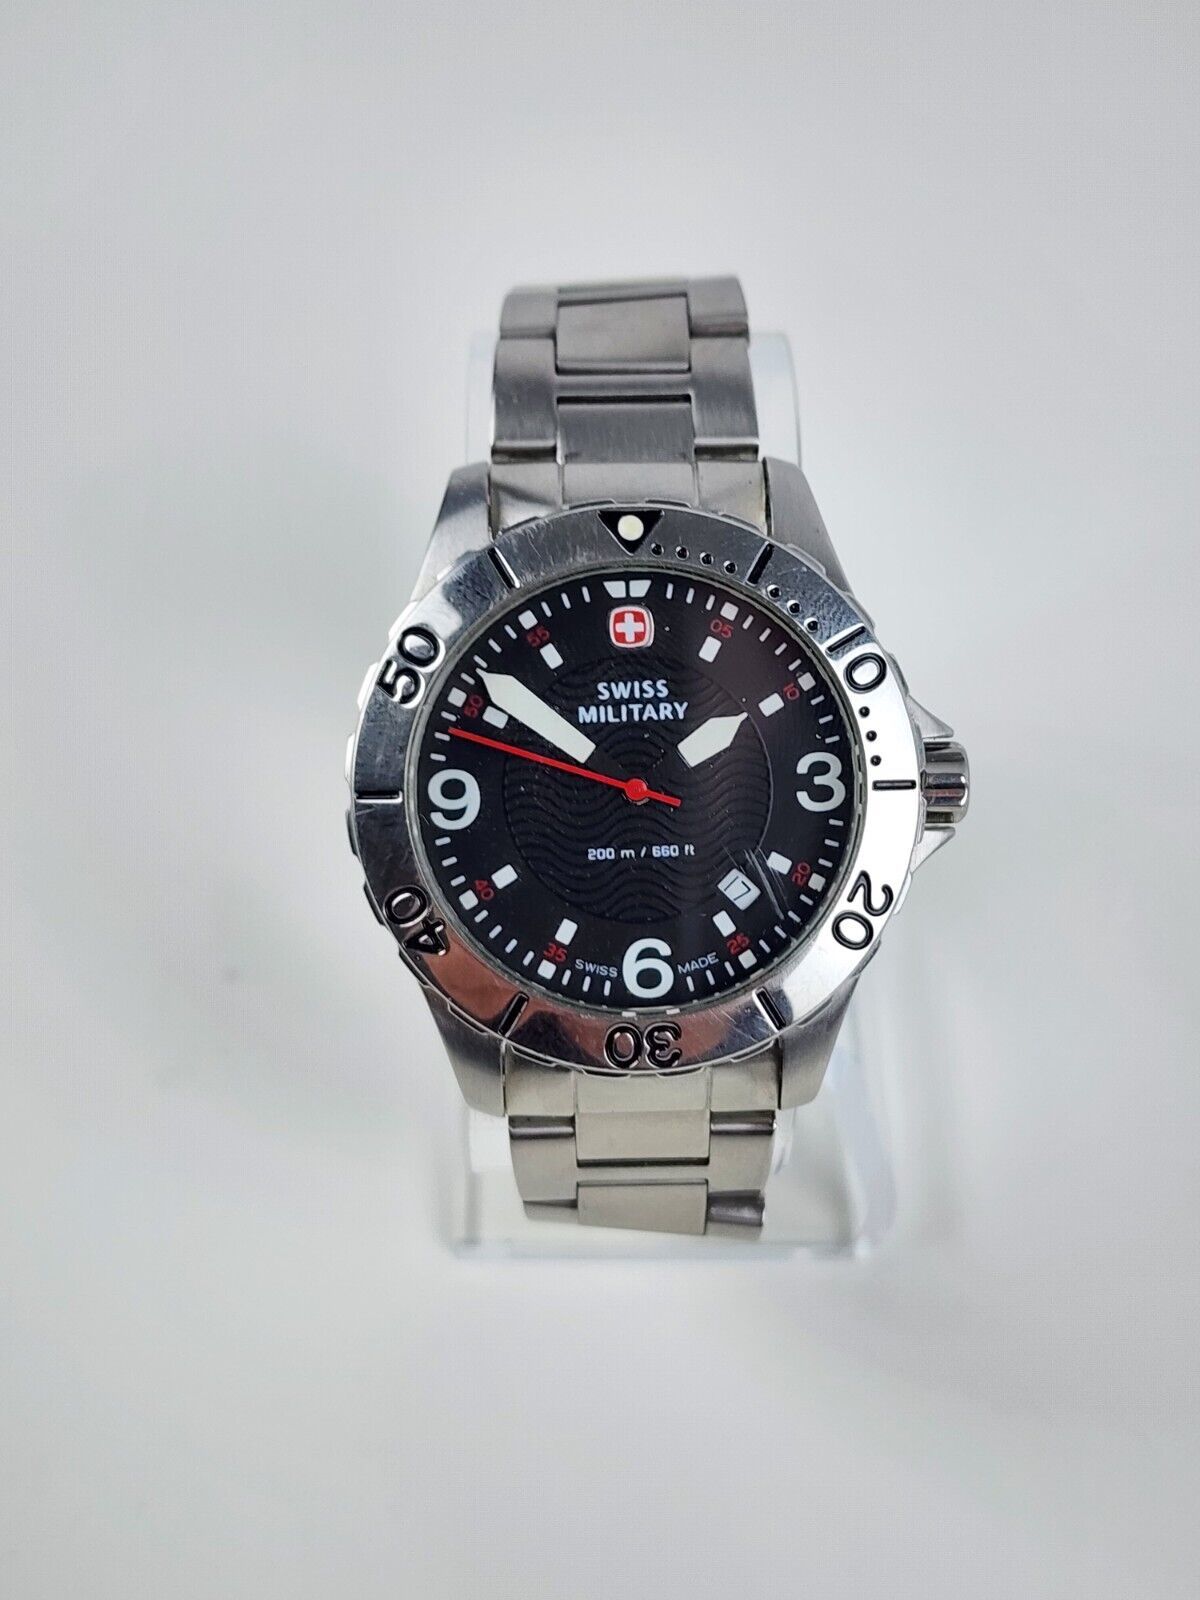 Wenger Swiss Military 5217x Mens Black Dial Quartz Watch Stainless Needs Battery - $59.39